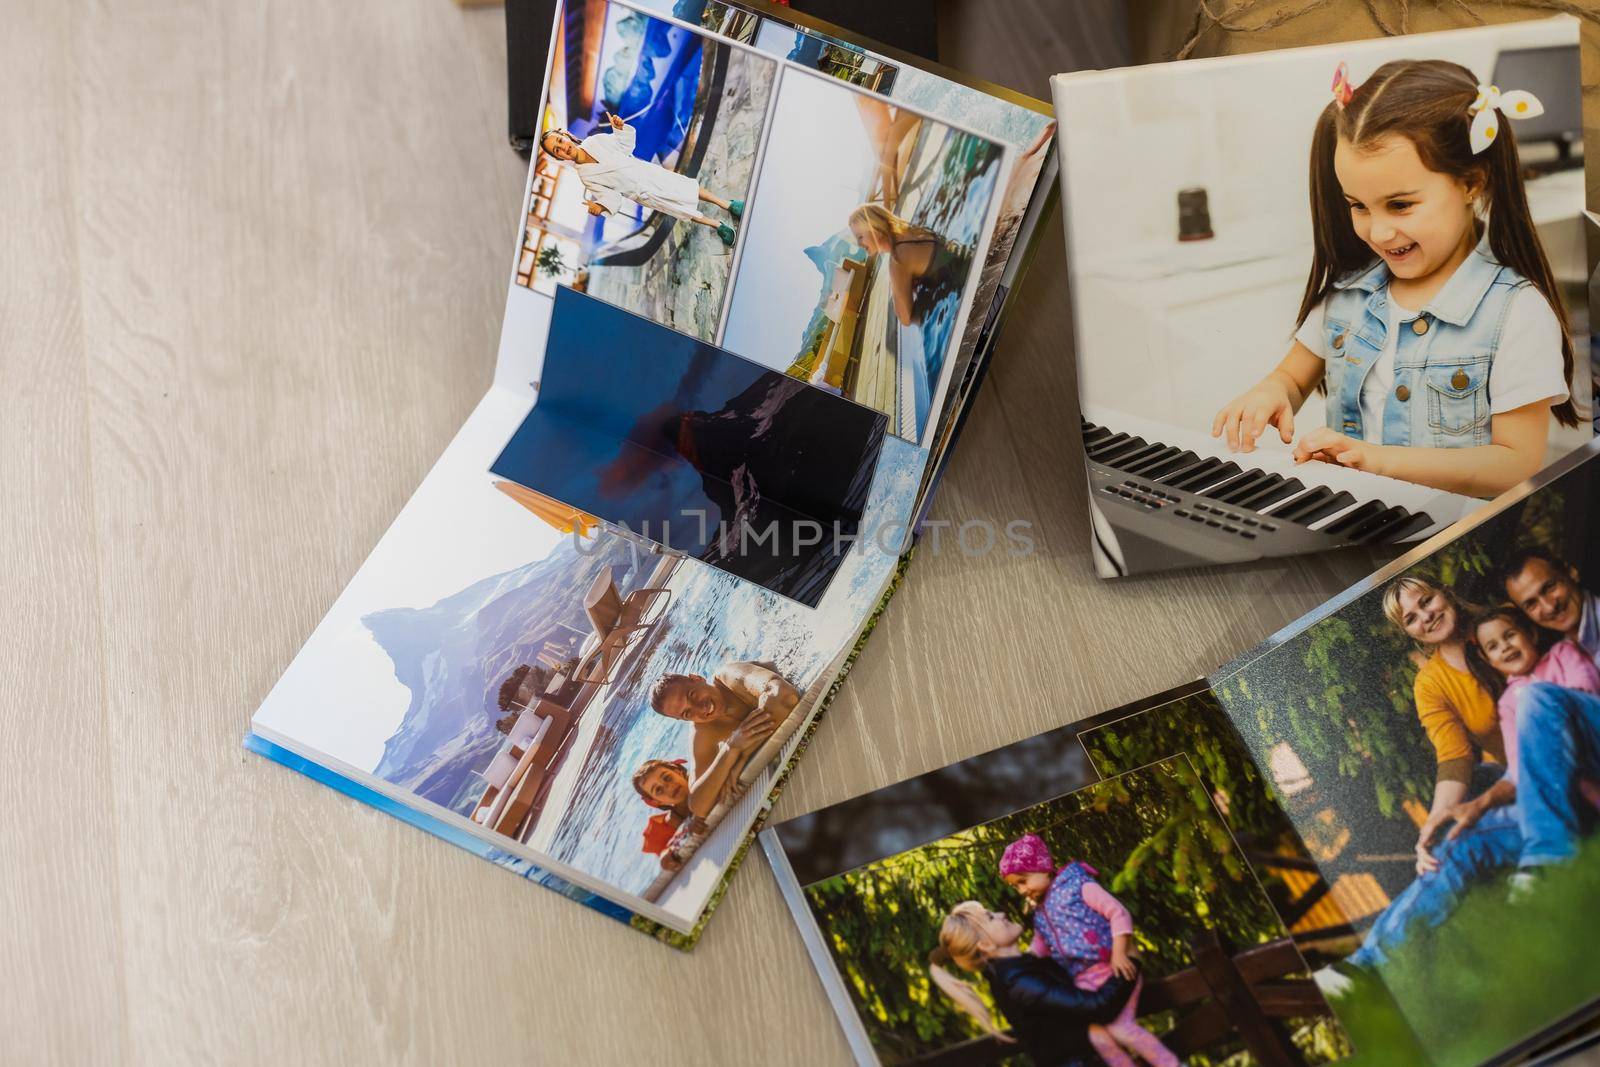 photo books near the christmas tree as a gift by Andelov13